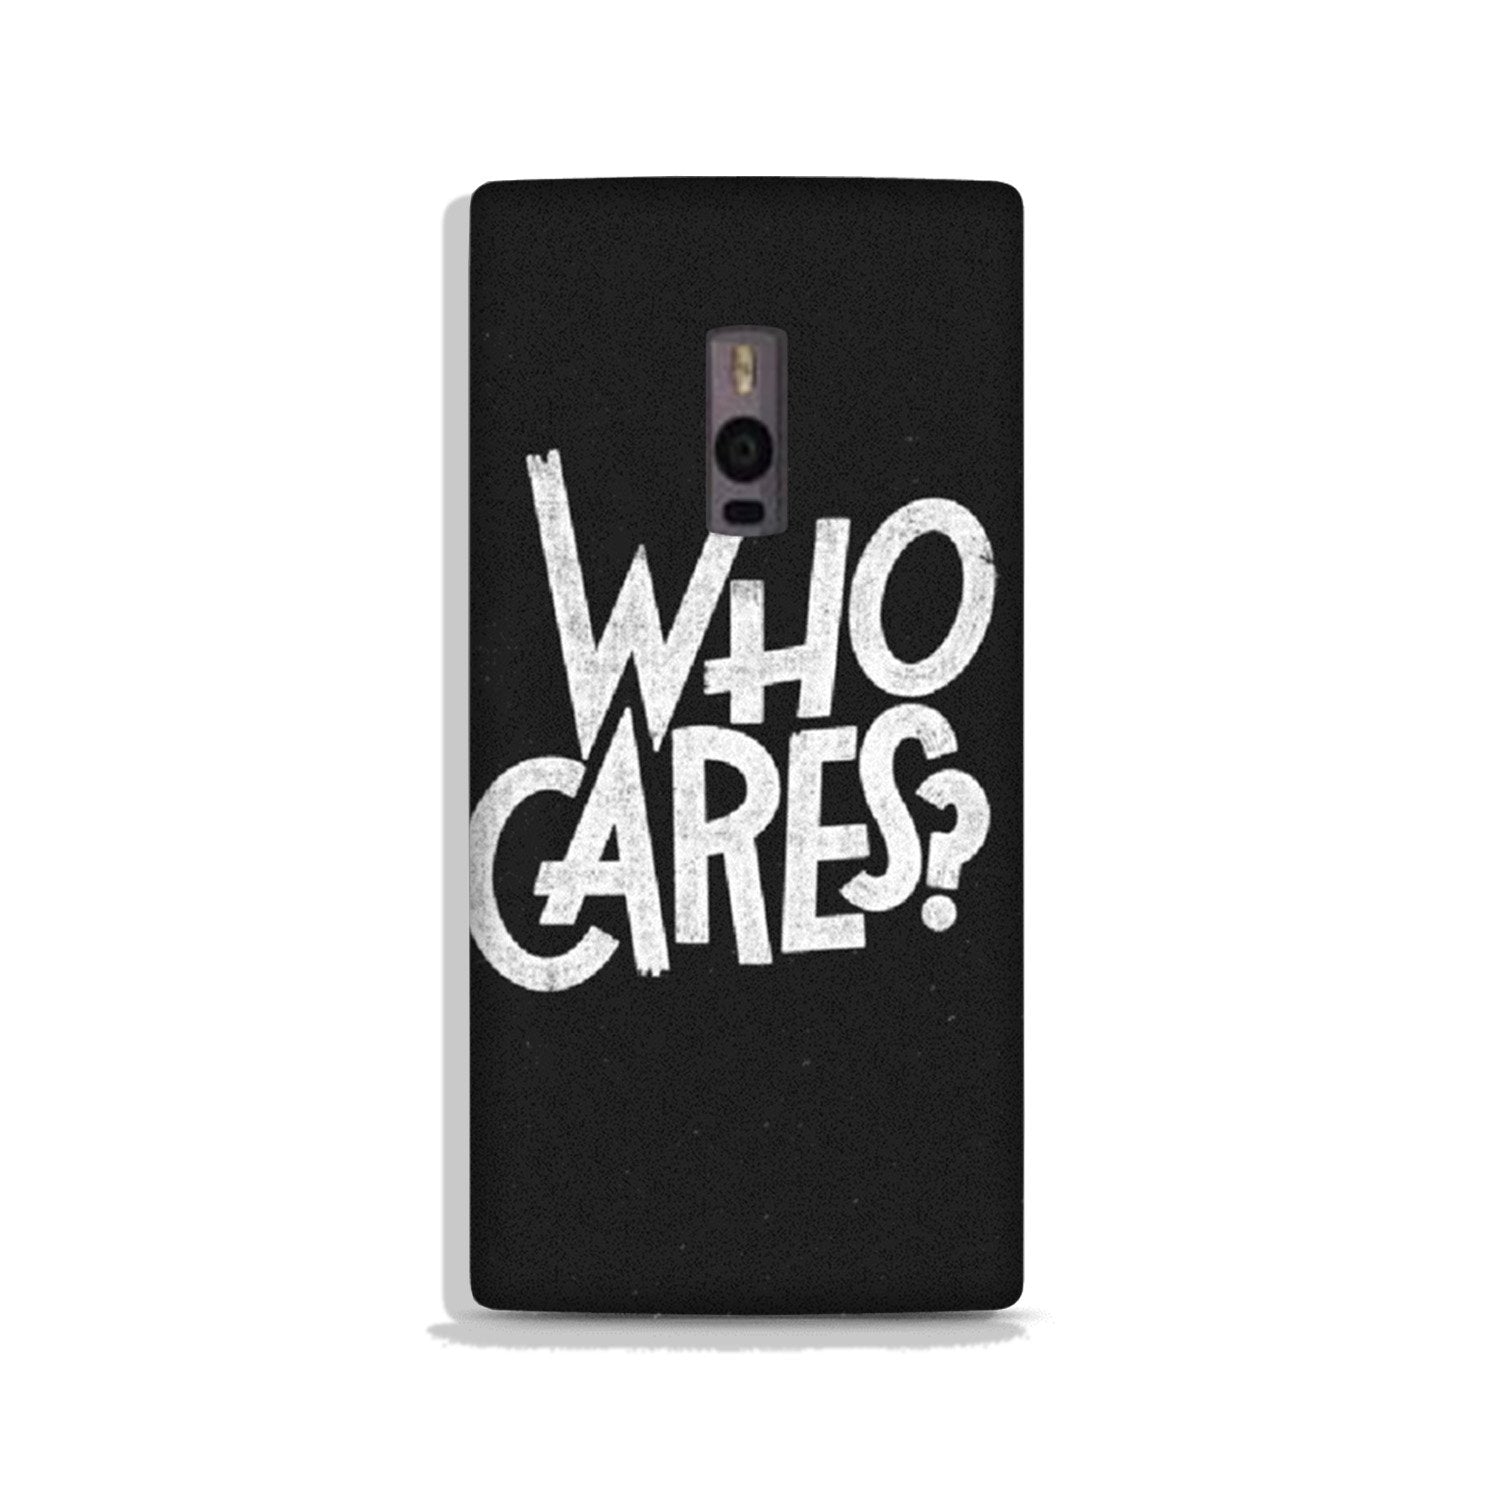 Who Cares Case for OnePlus 2